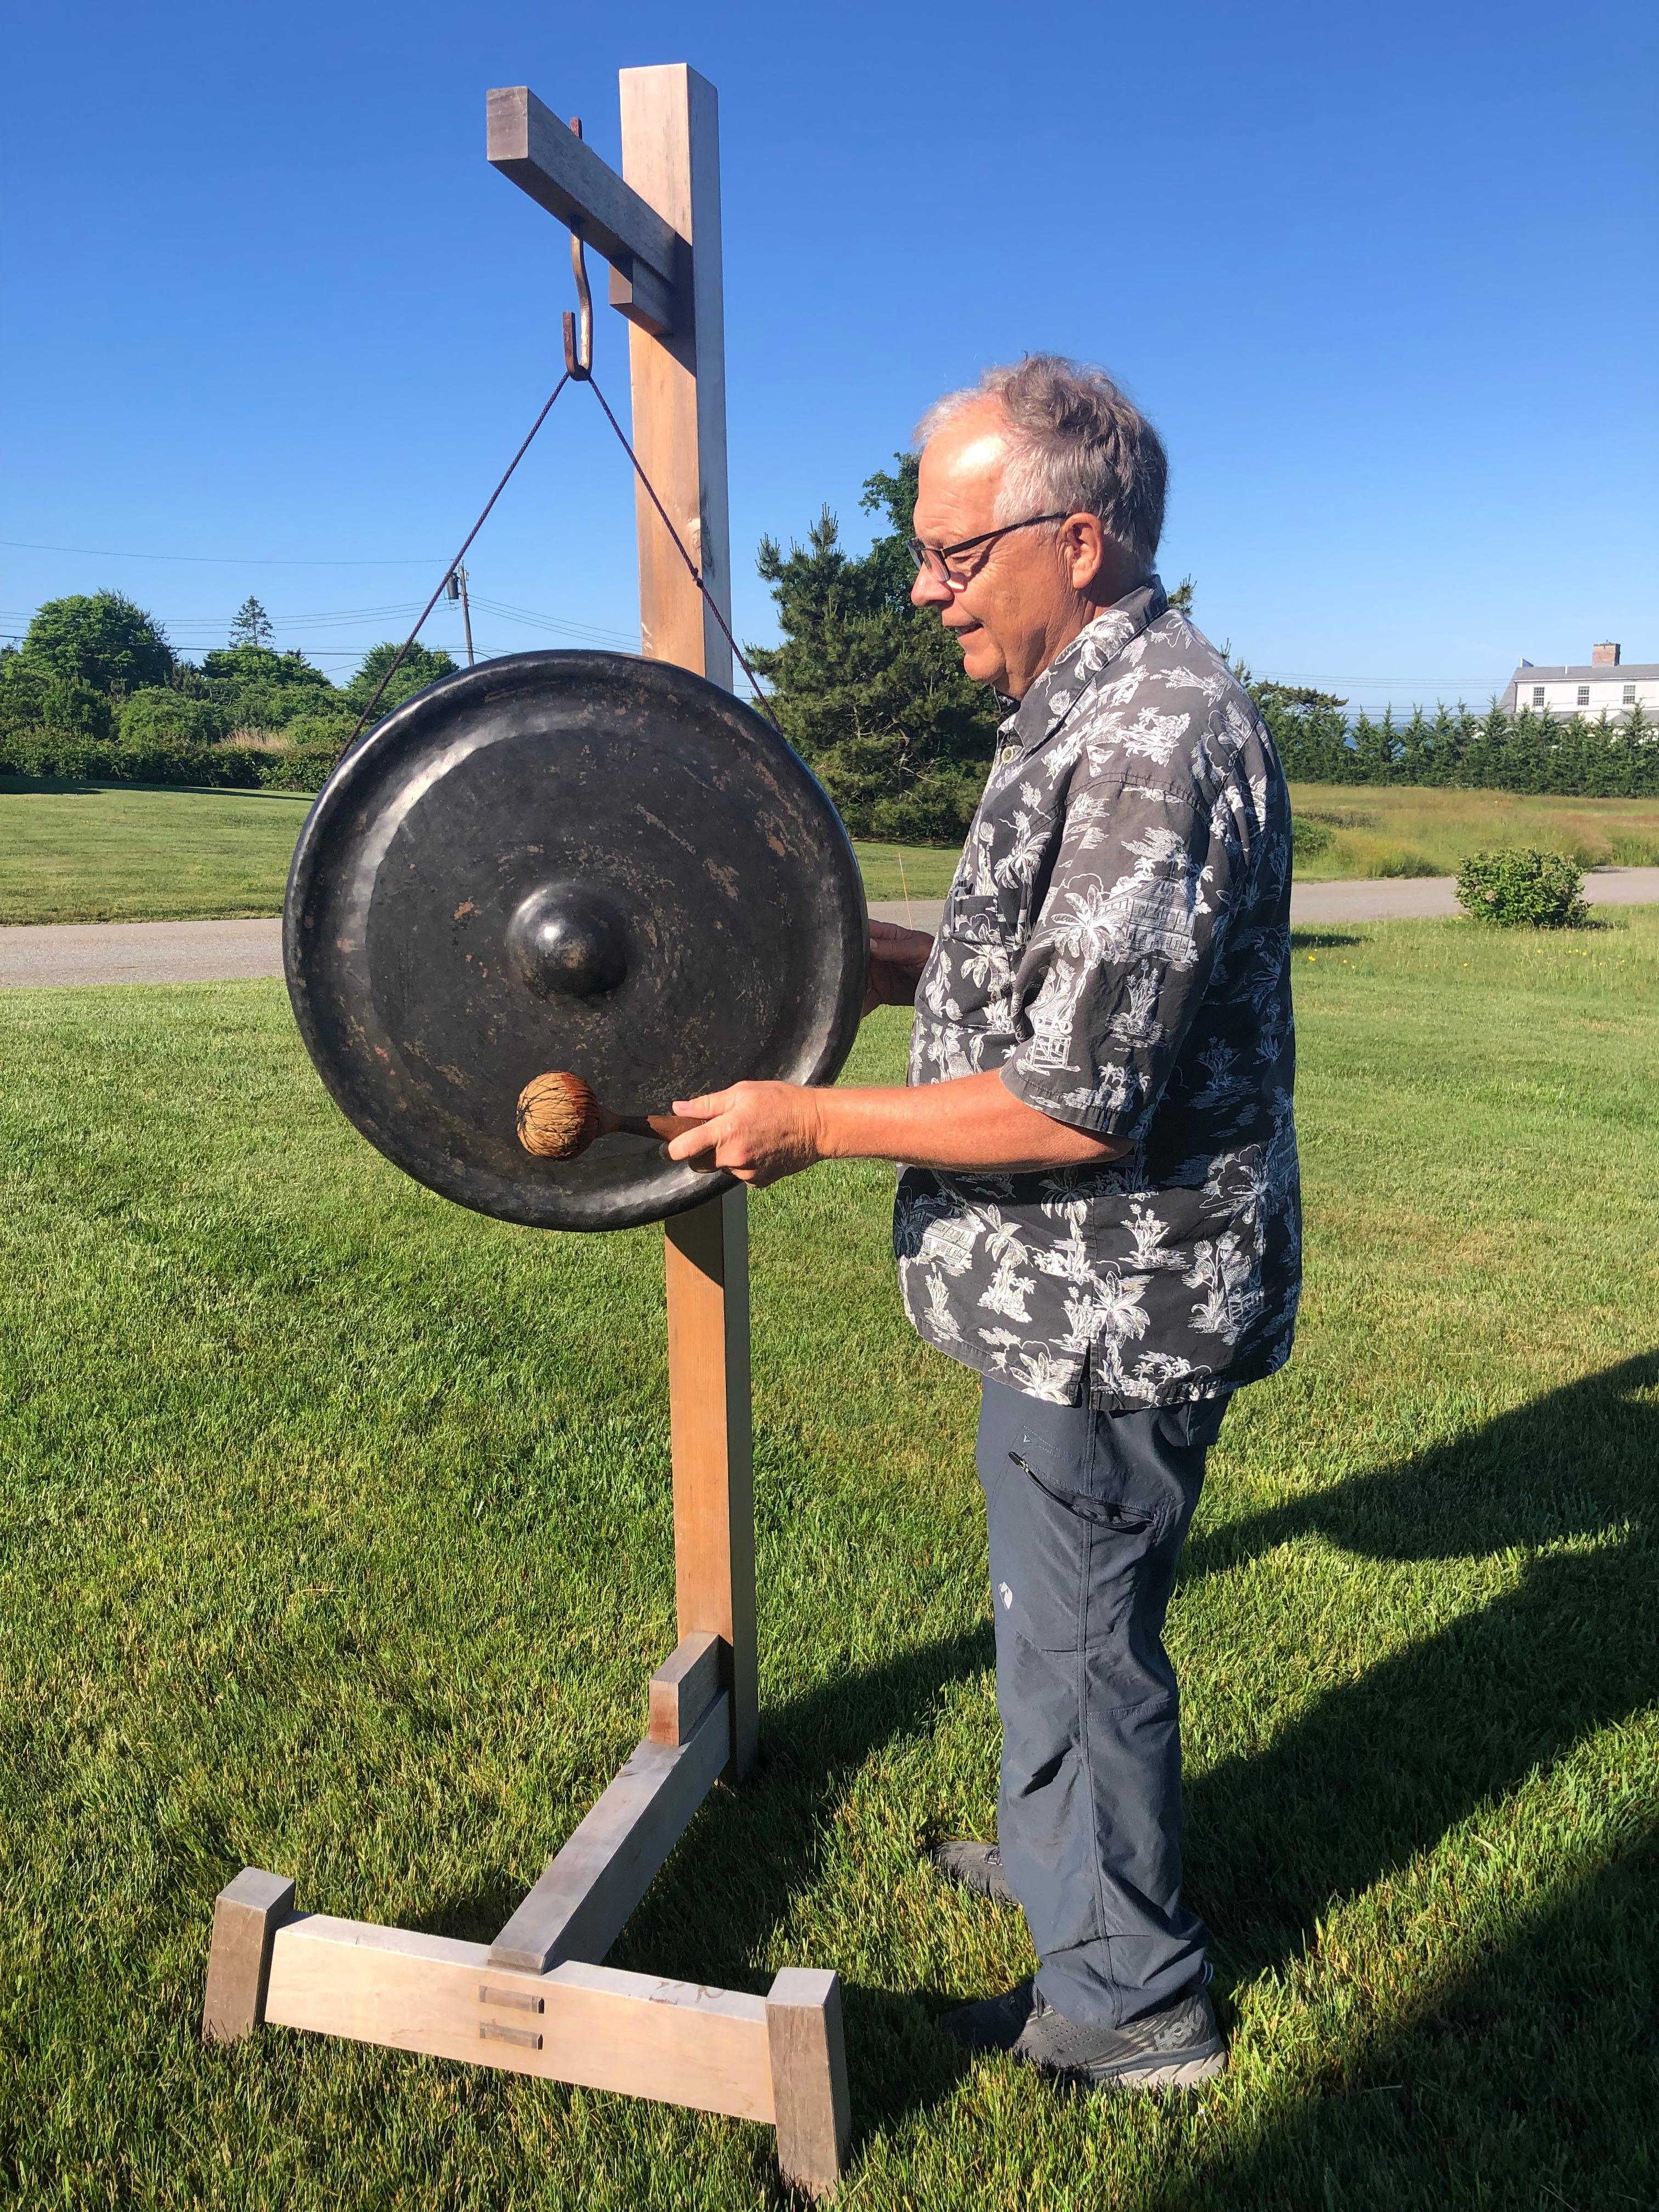 Rare large 23 inch size- with pleasant resonating sound guaranteed to please you

Here's a very nice and handsome early 20th century bronze gong with striker which we just found from an old southern Japanese collection.

This large scale antique